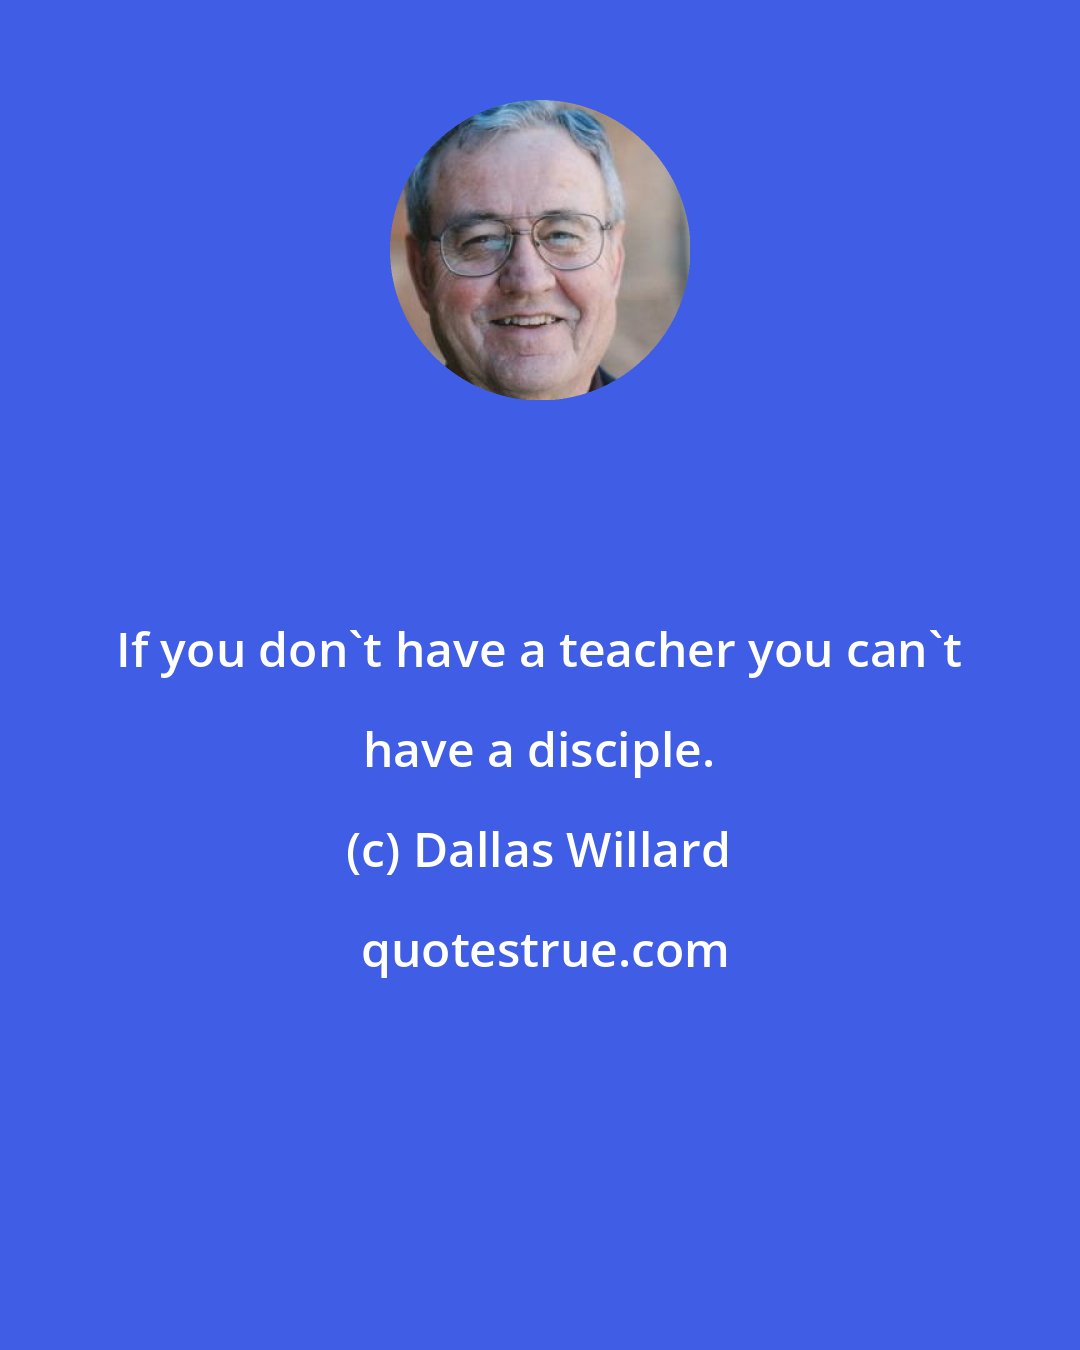 Dallas Willard: If you don't have a teacher you can't have a disciple.